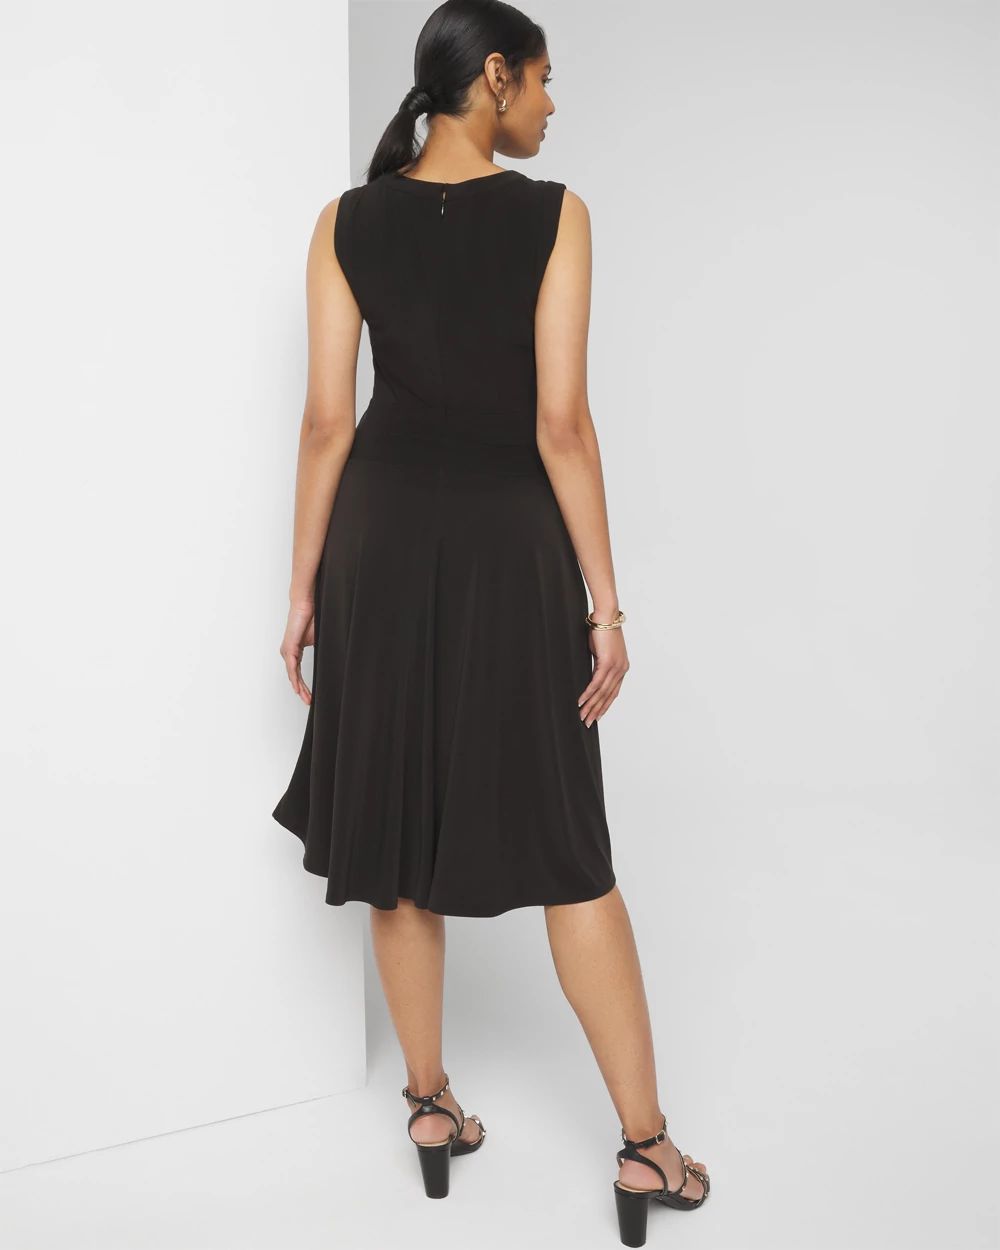 Cap-Sleeve Matte Jersey Keyhole A-line Dress click to view larger image.